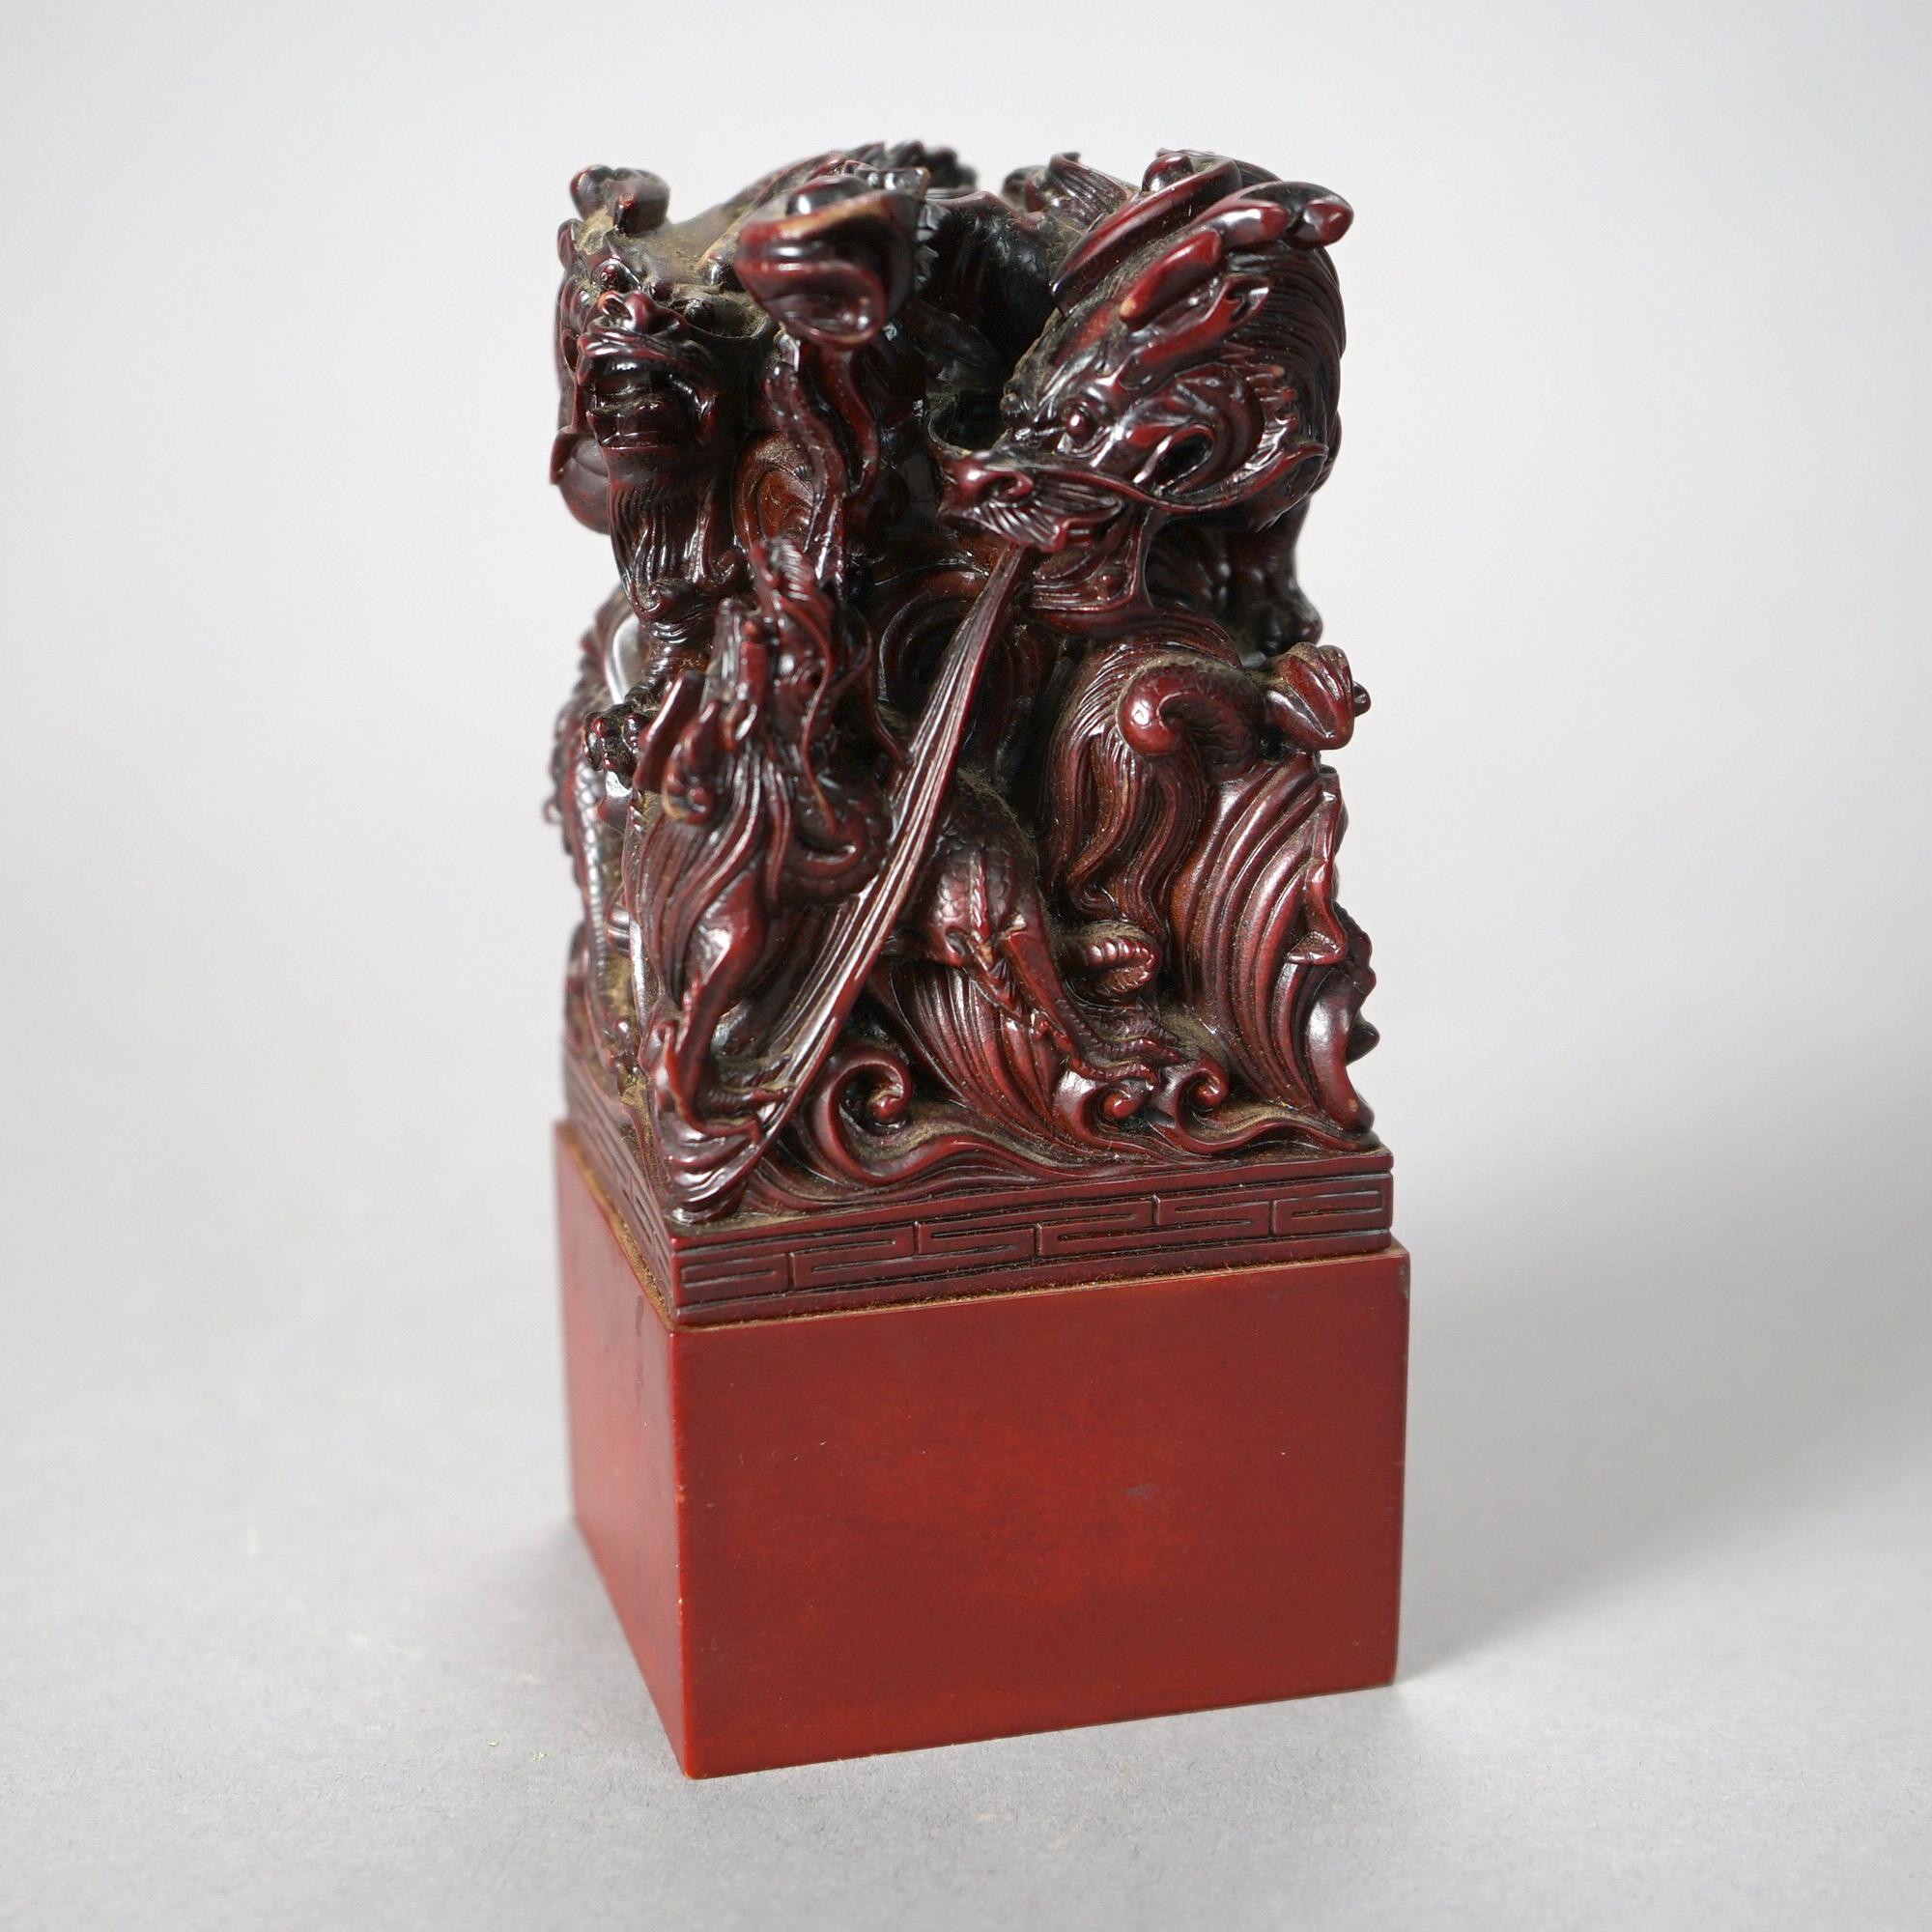 Antique Chinese Carved Hardwood Figural Group with Dragons, circa 1920 For Sale 1